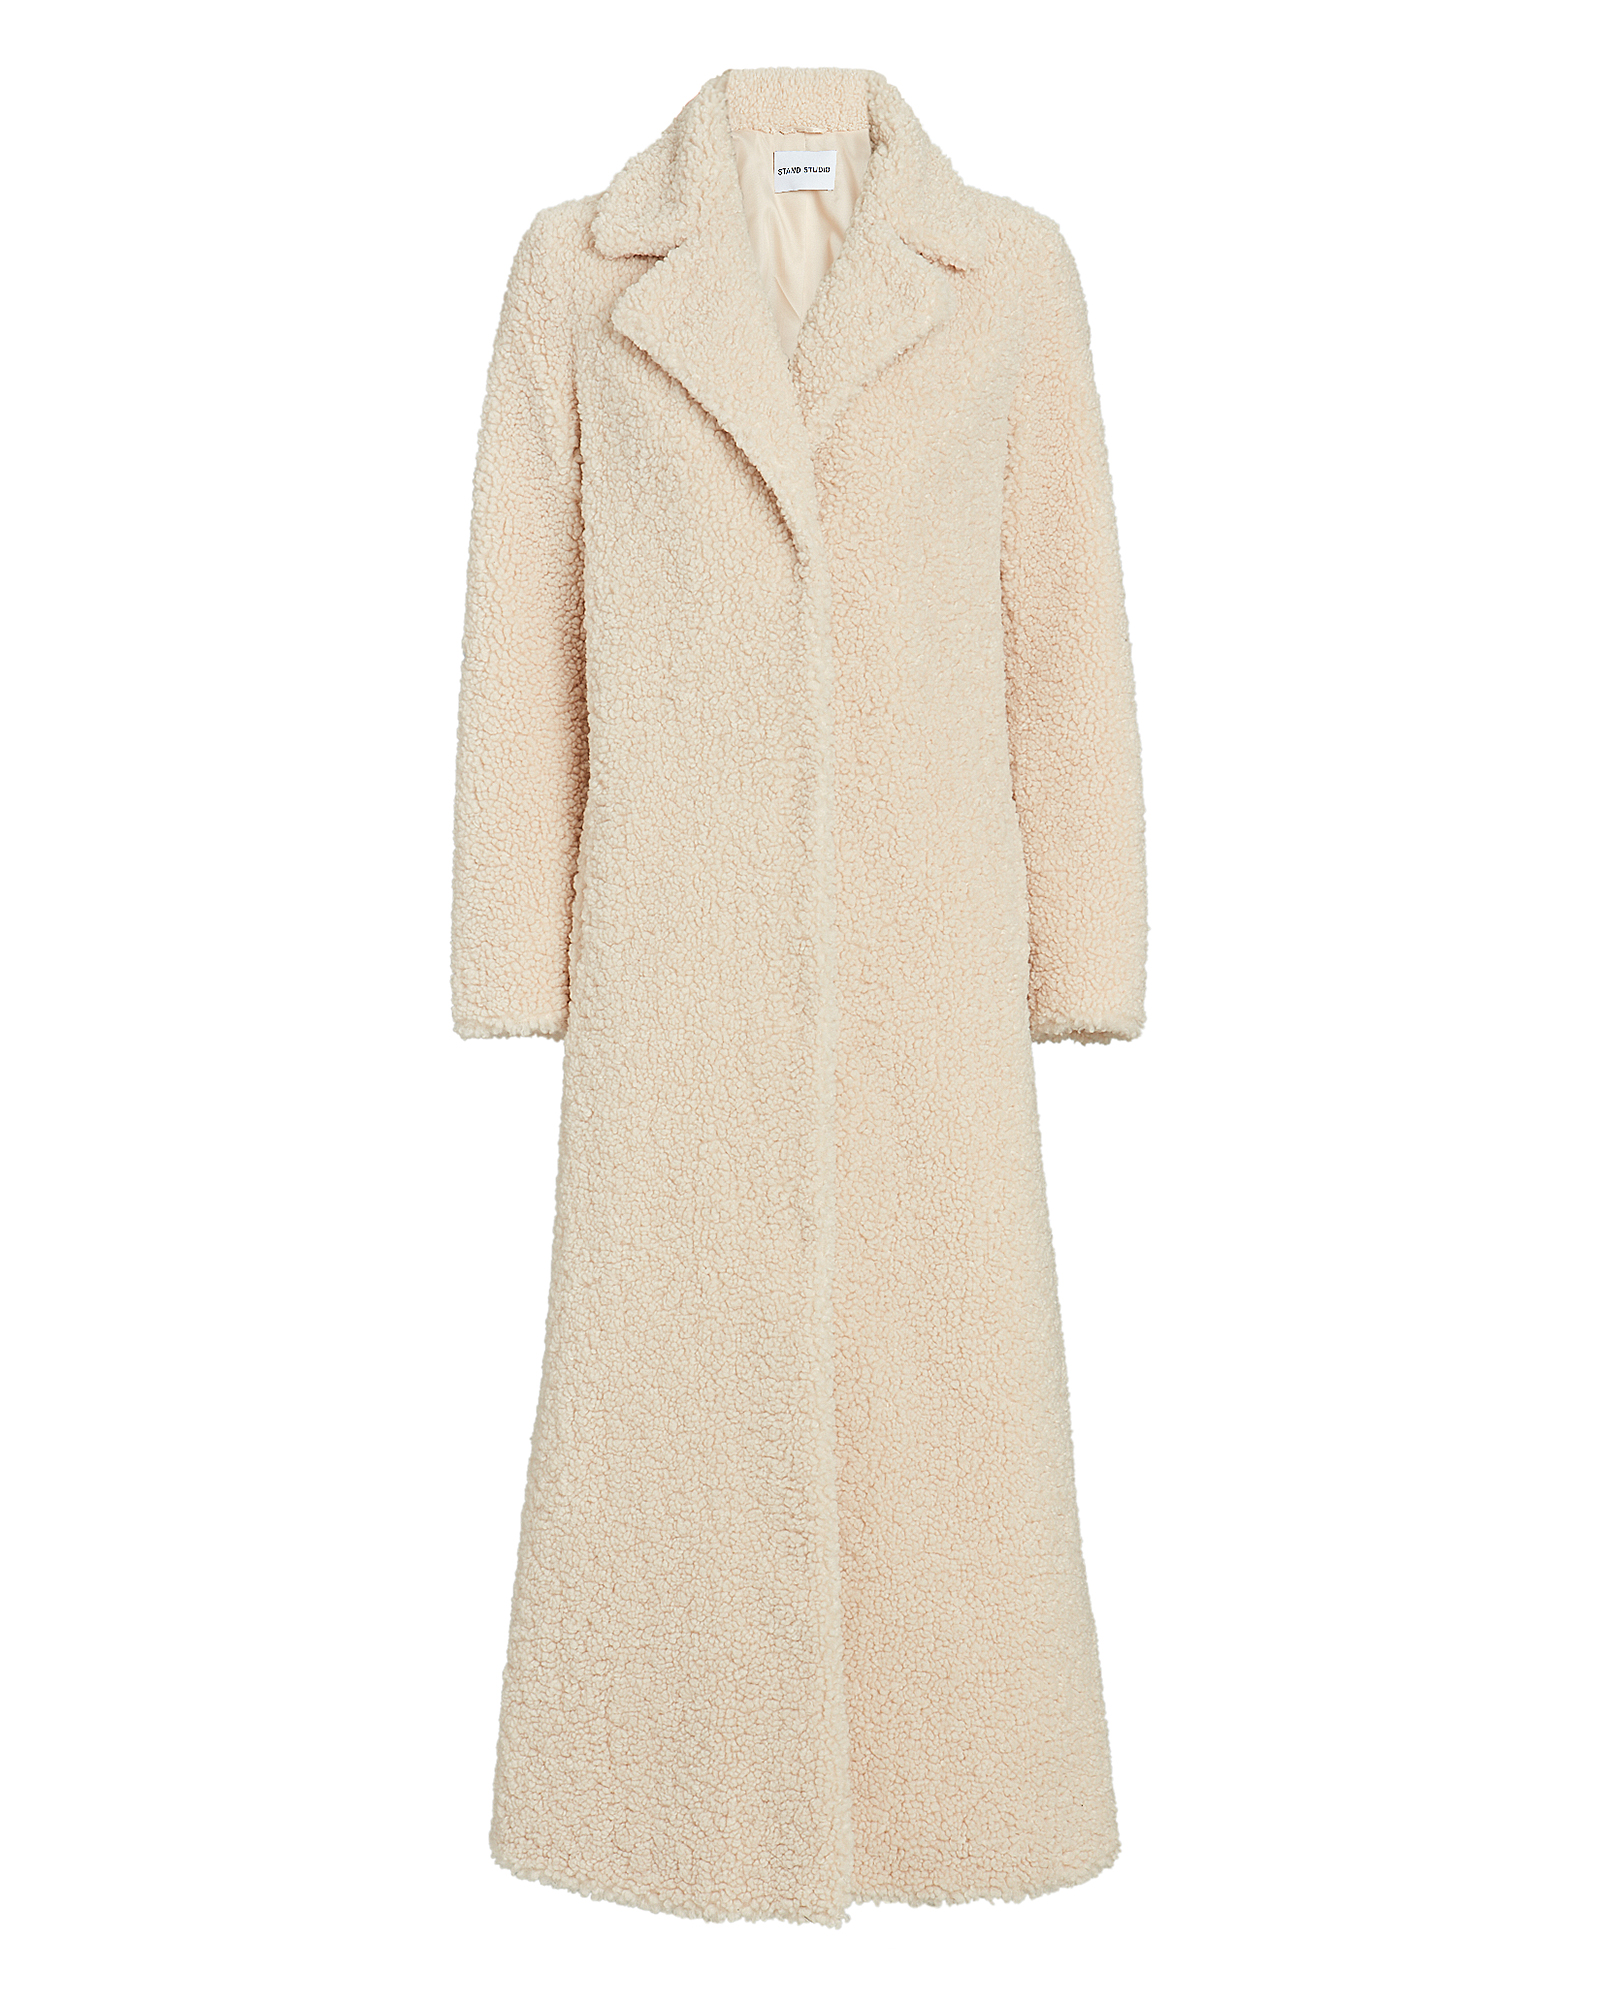 STAND Kylie Long Teddy Coat | INTERMIX®